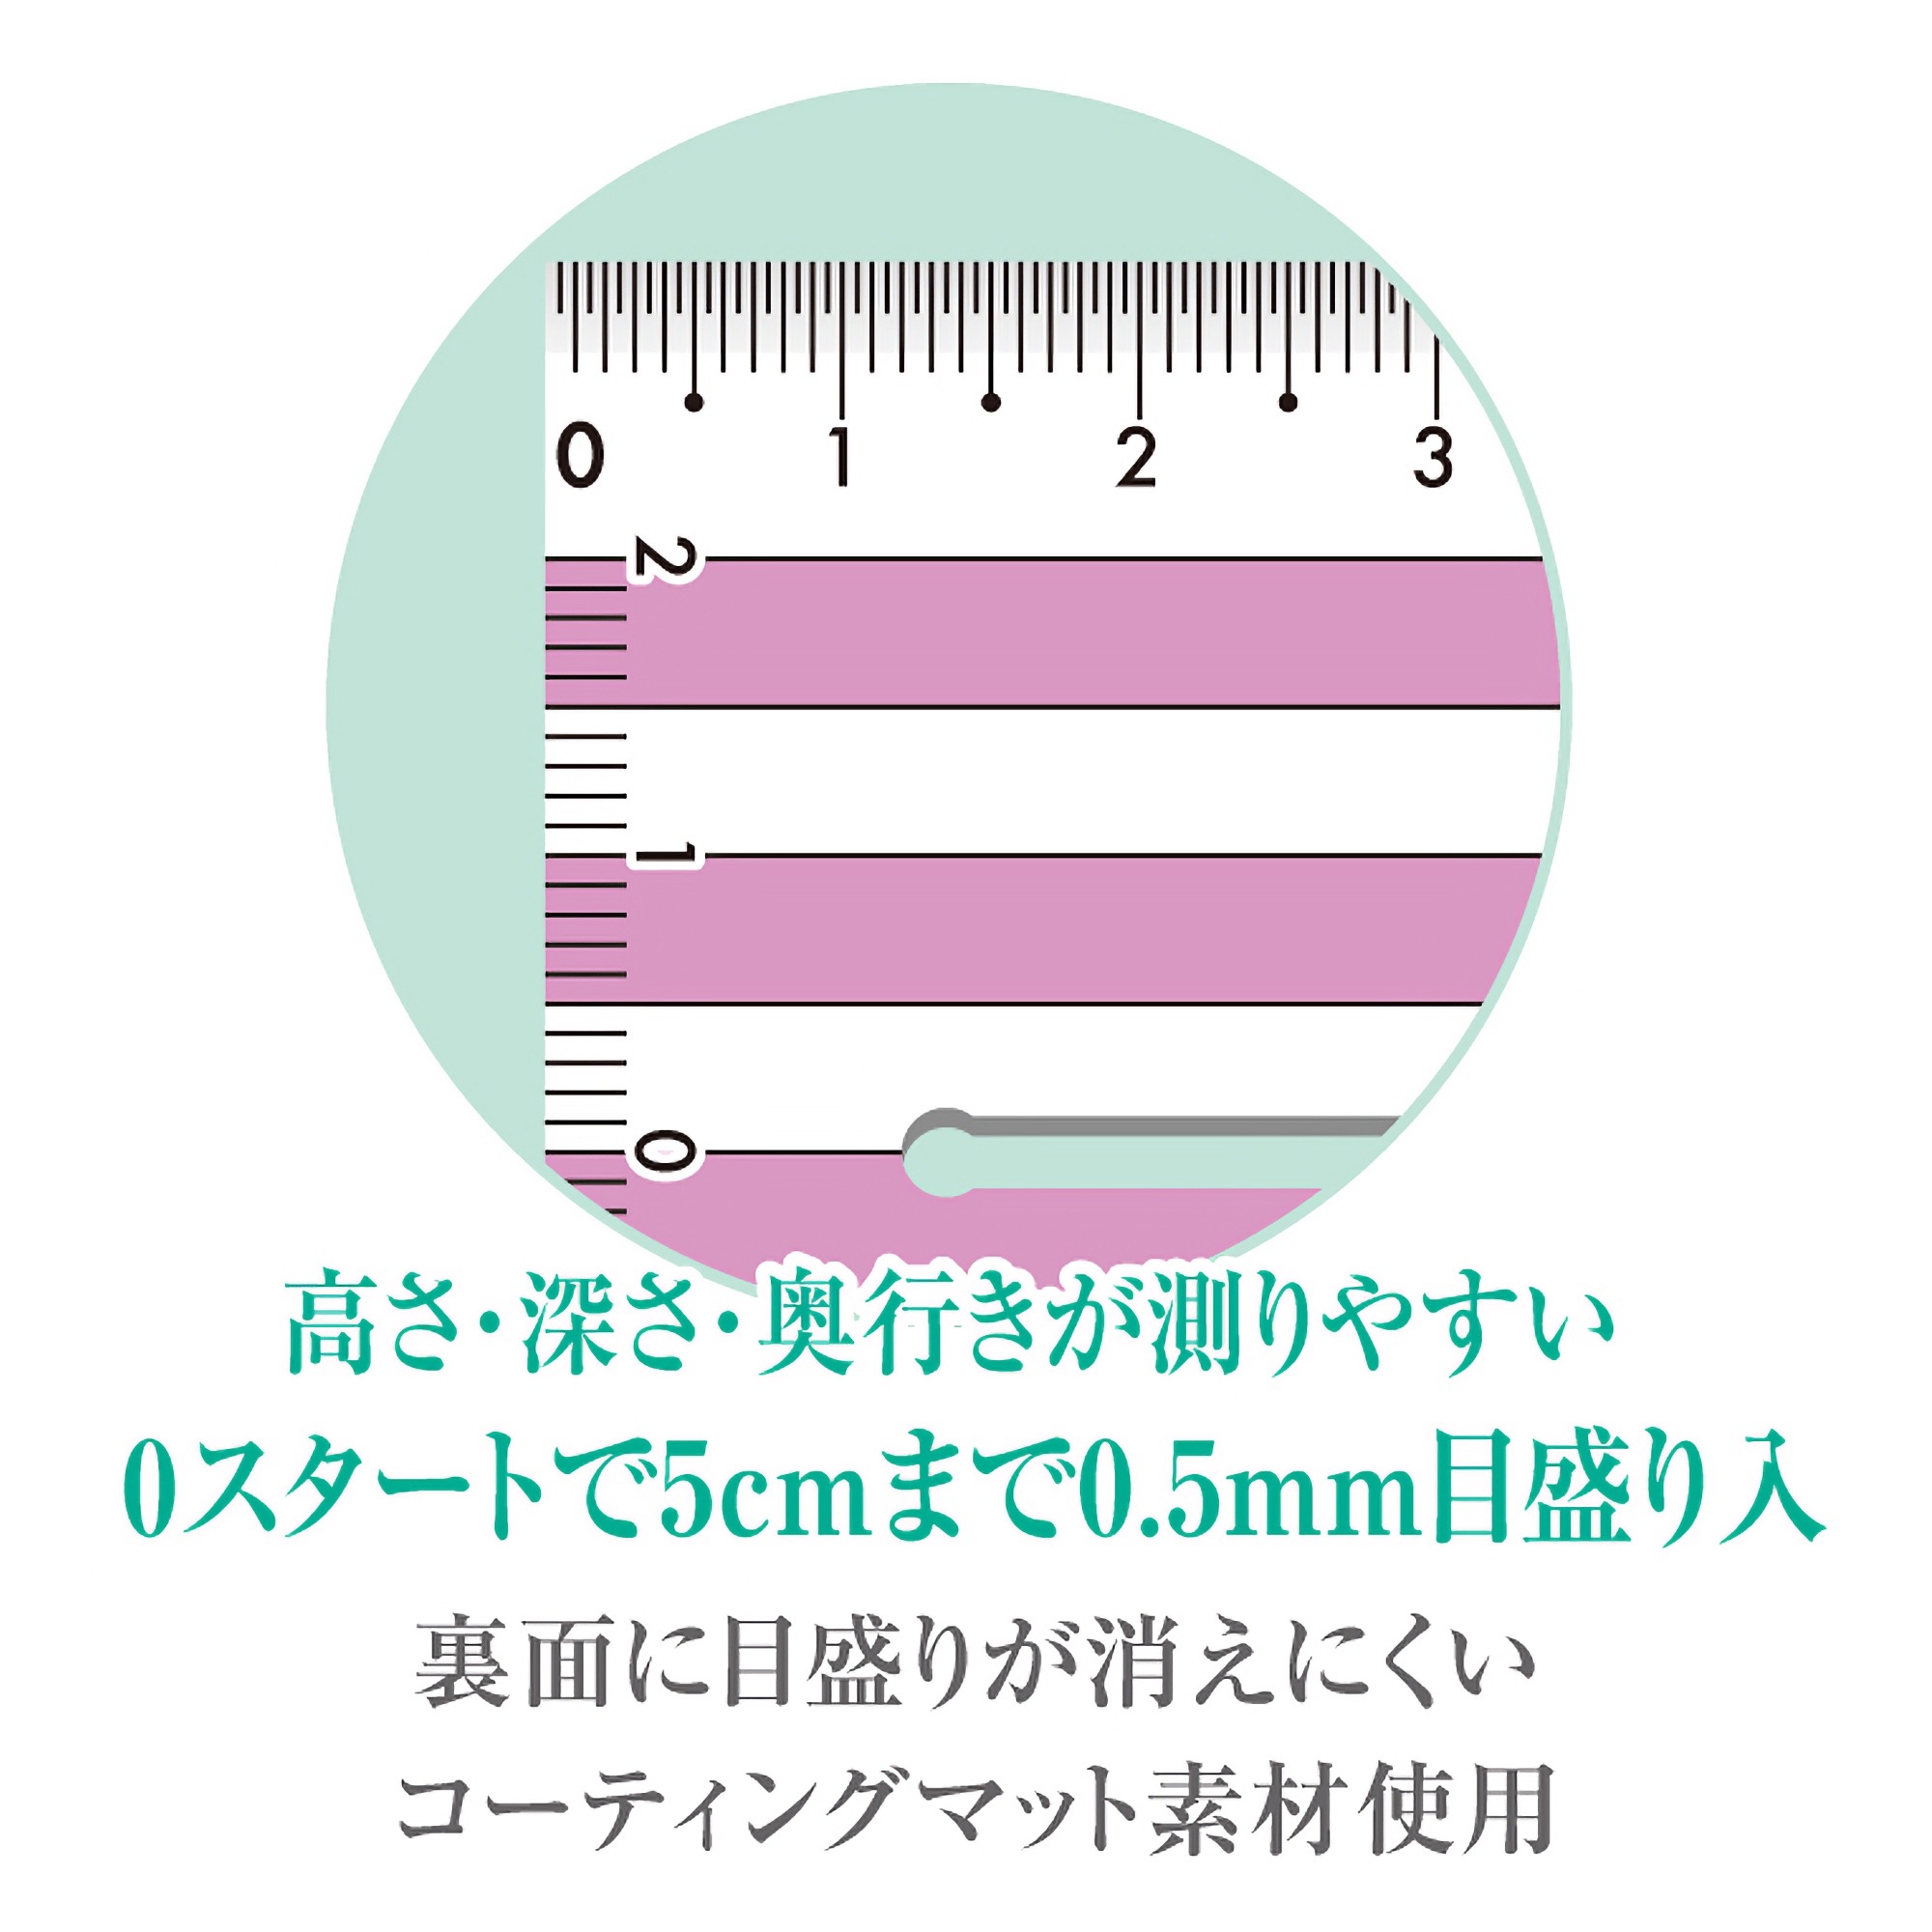 Kyoei Orions Draw a Parallel Ruler 16 cm